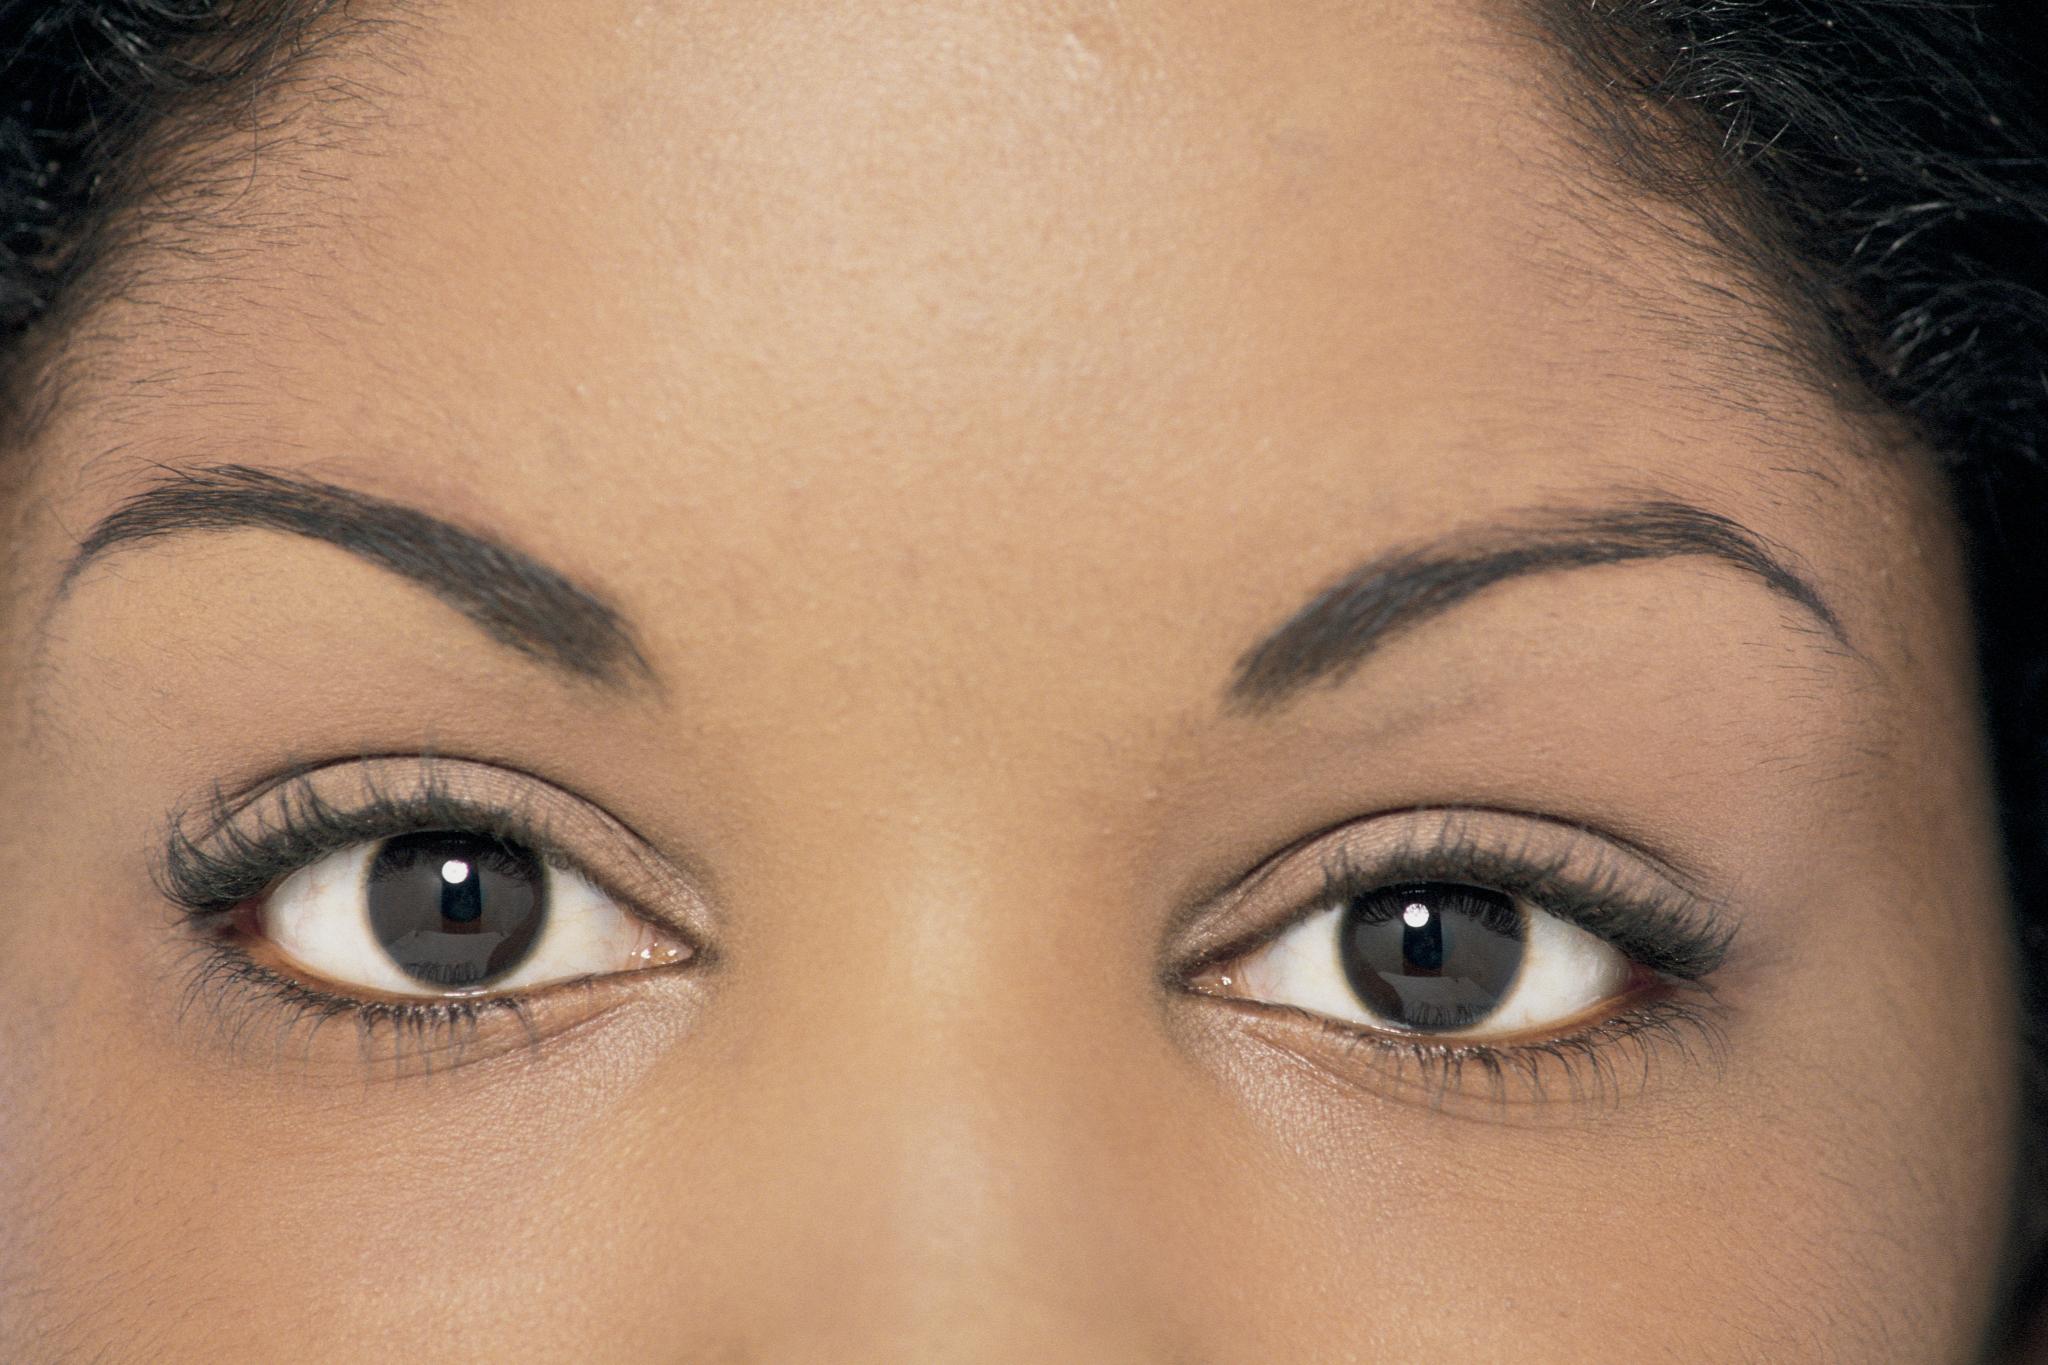 From The Pros: Will My Eyebrows Ever Grow Back?